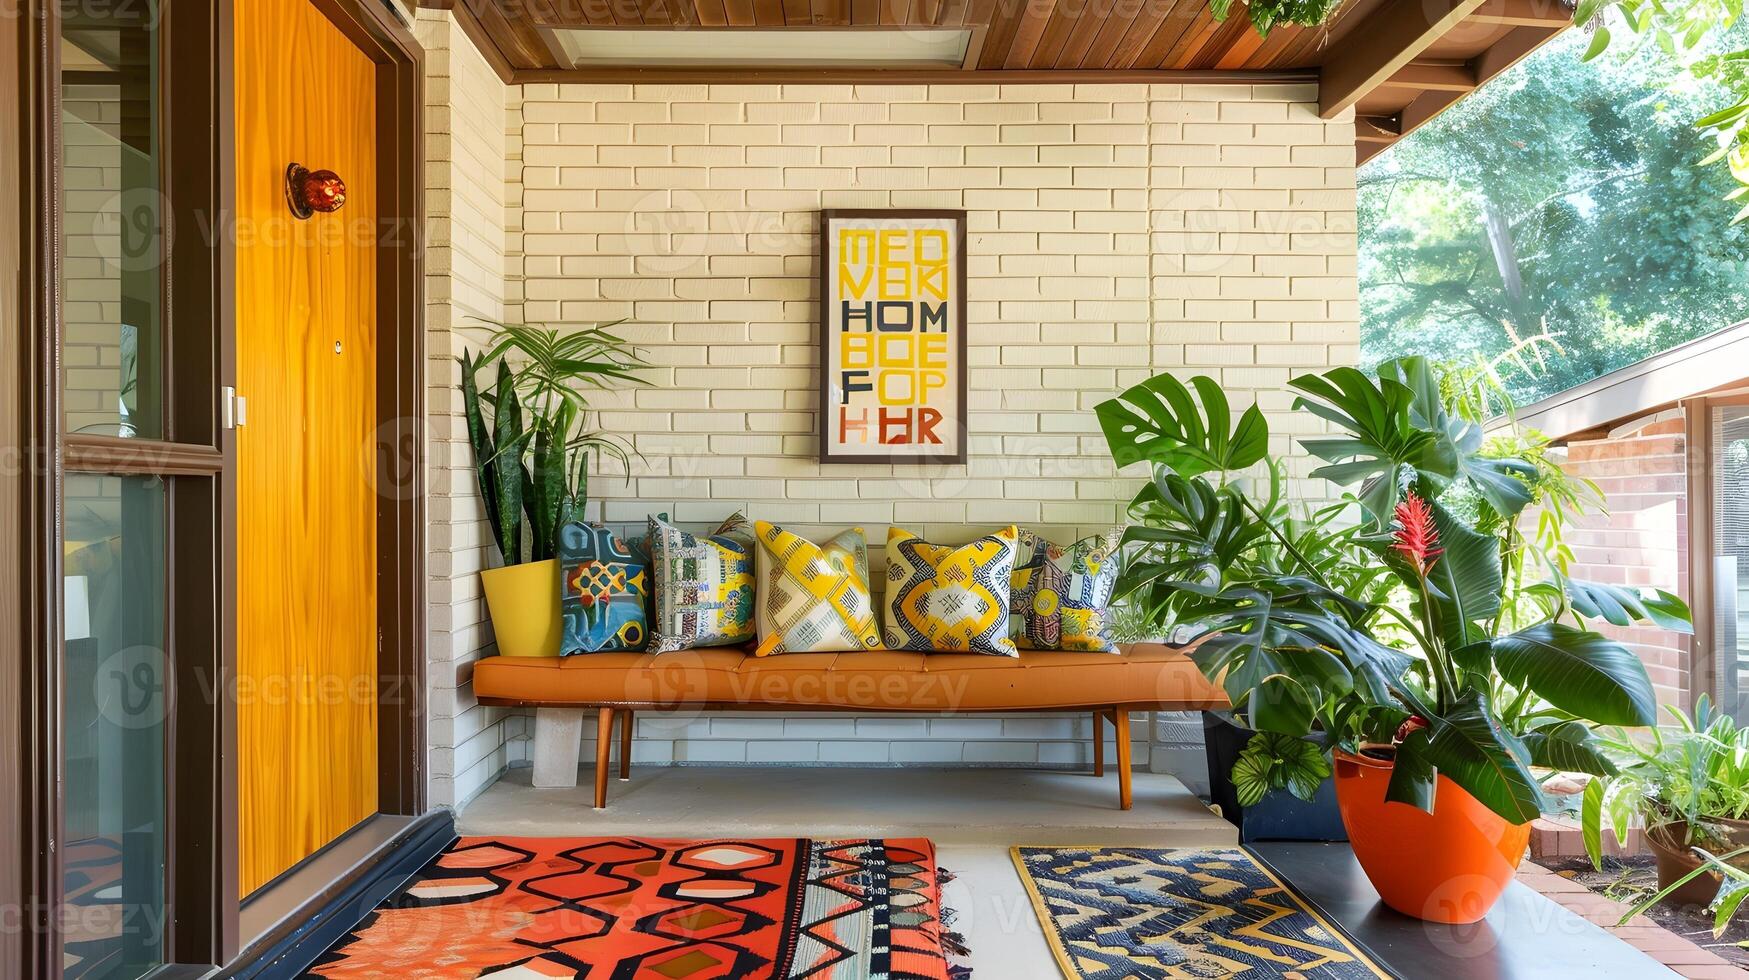 Cozy and Stylish Midcentury Modern Home Interior with Tropical Accents and Vibrant Decor Elements in a Sunlit Living Room photo